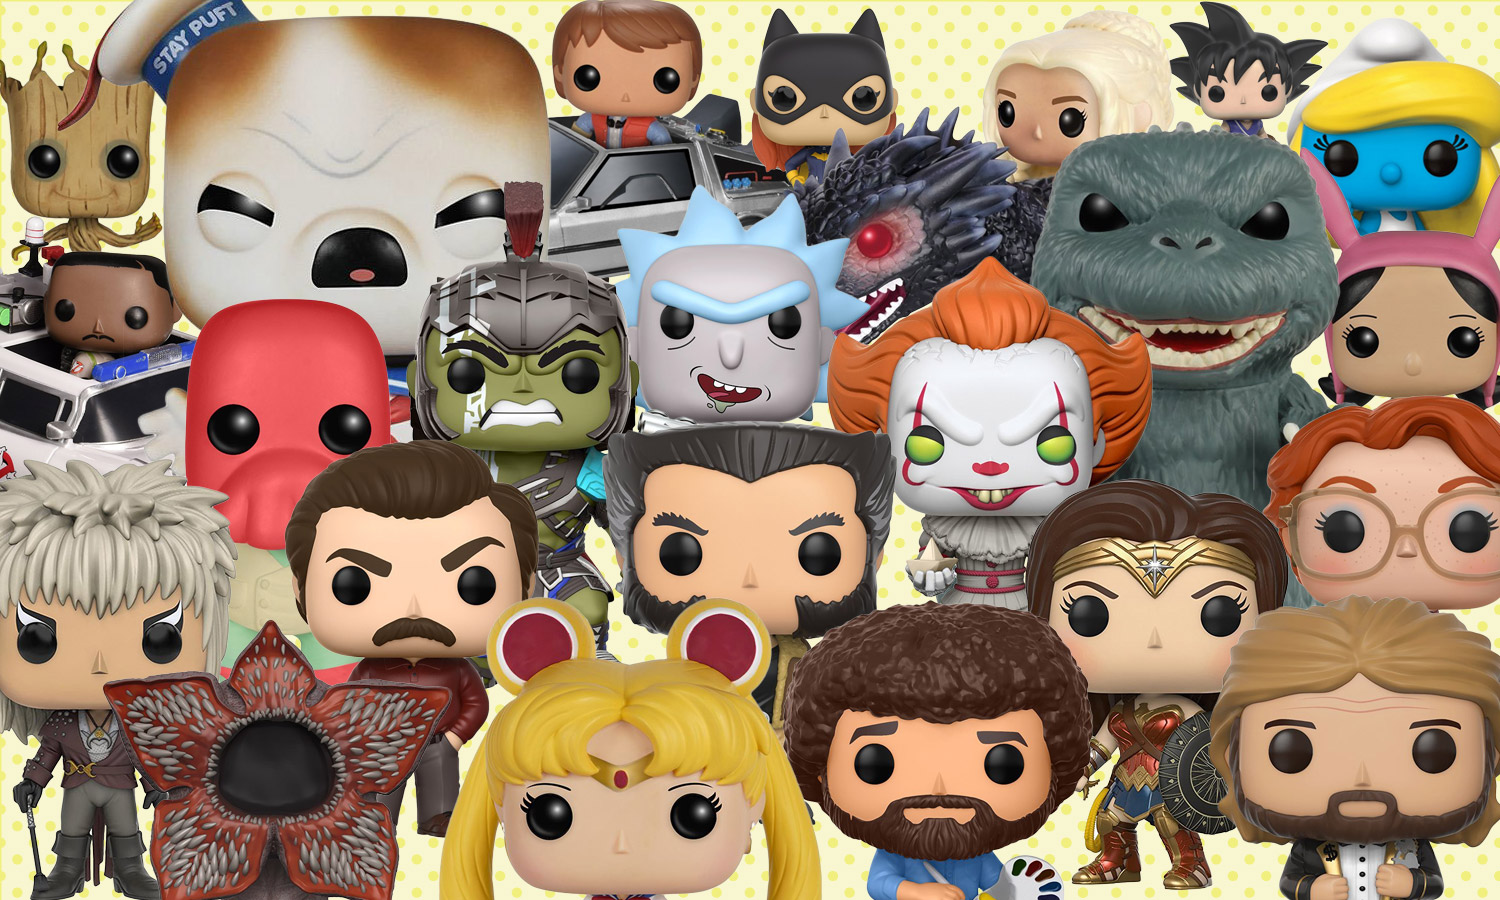 Best Funko Pop Vinyls 33 Figures to Add to Your Collection Tom's Guide